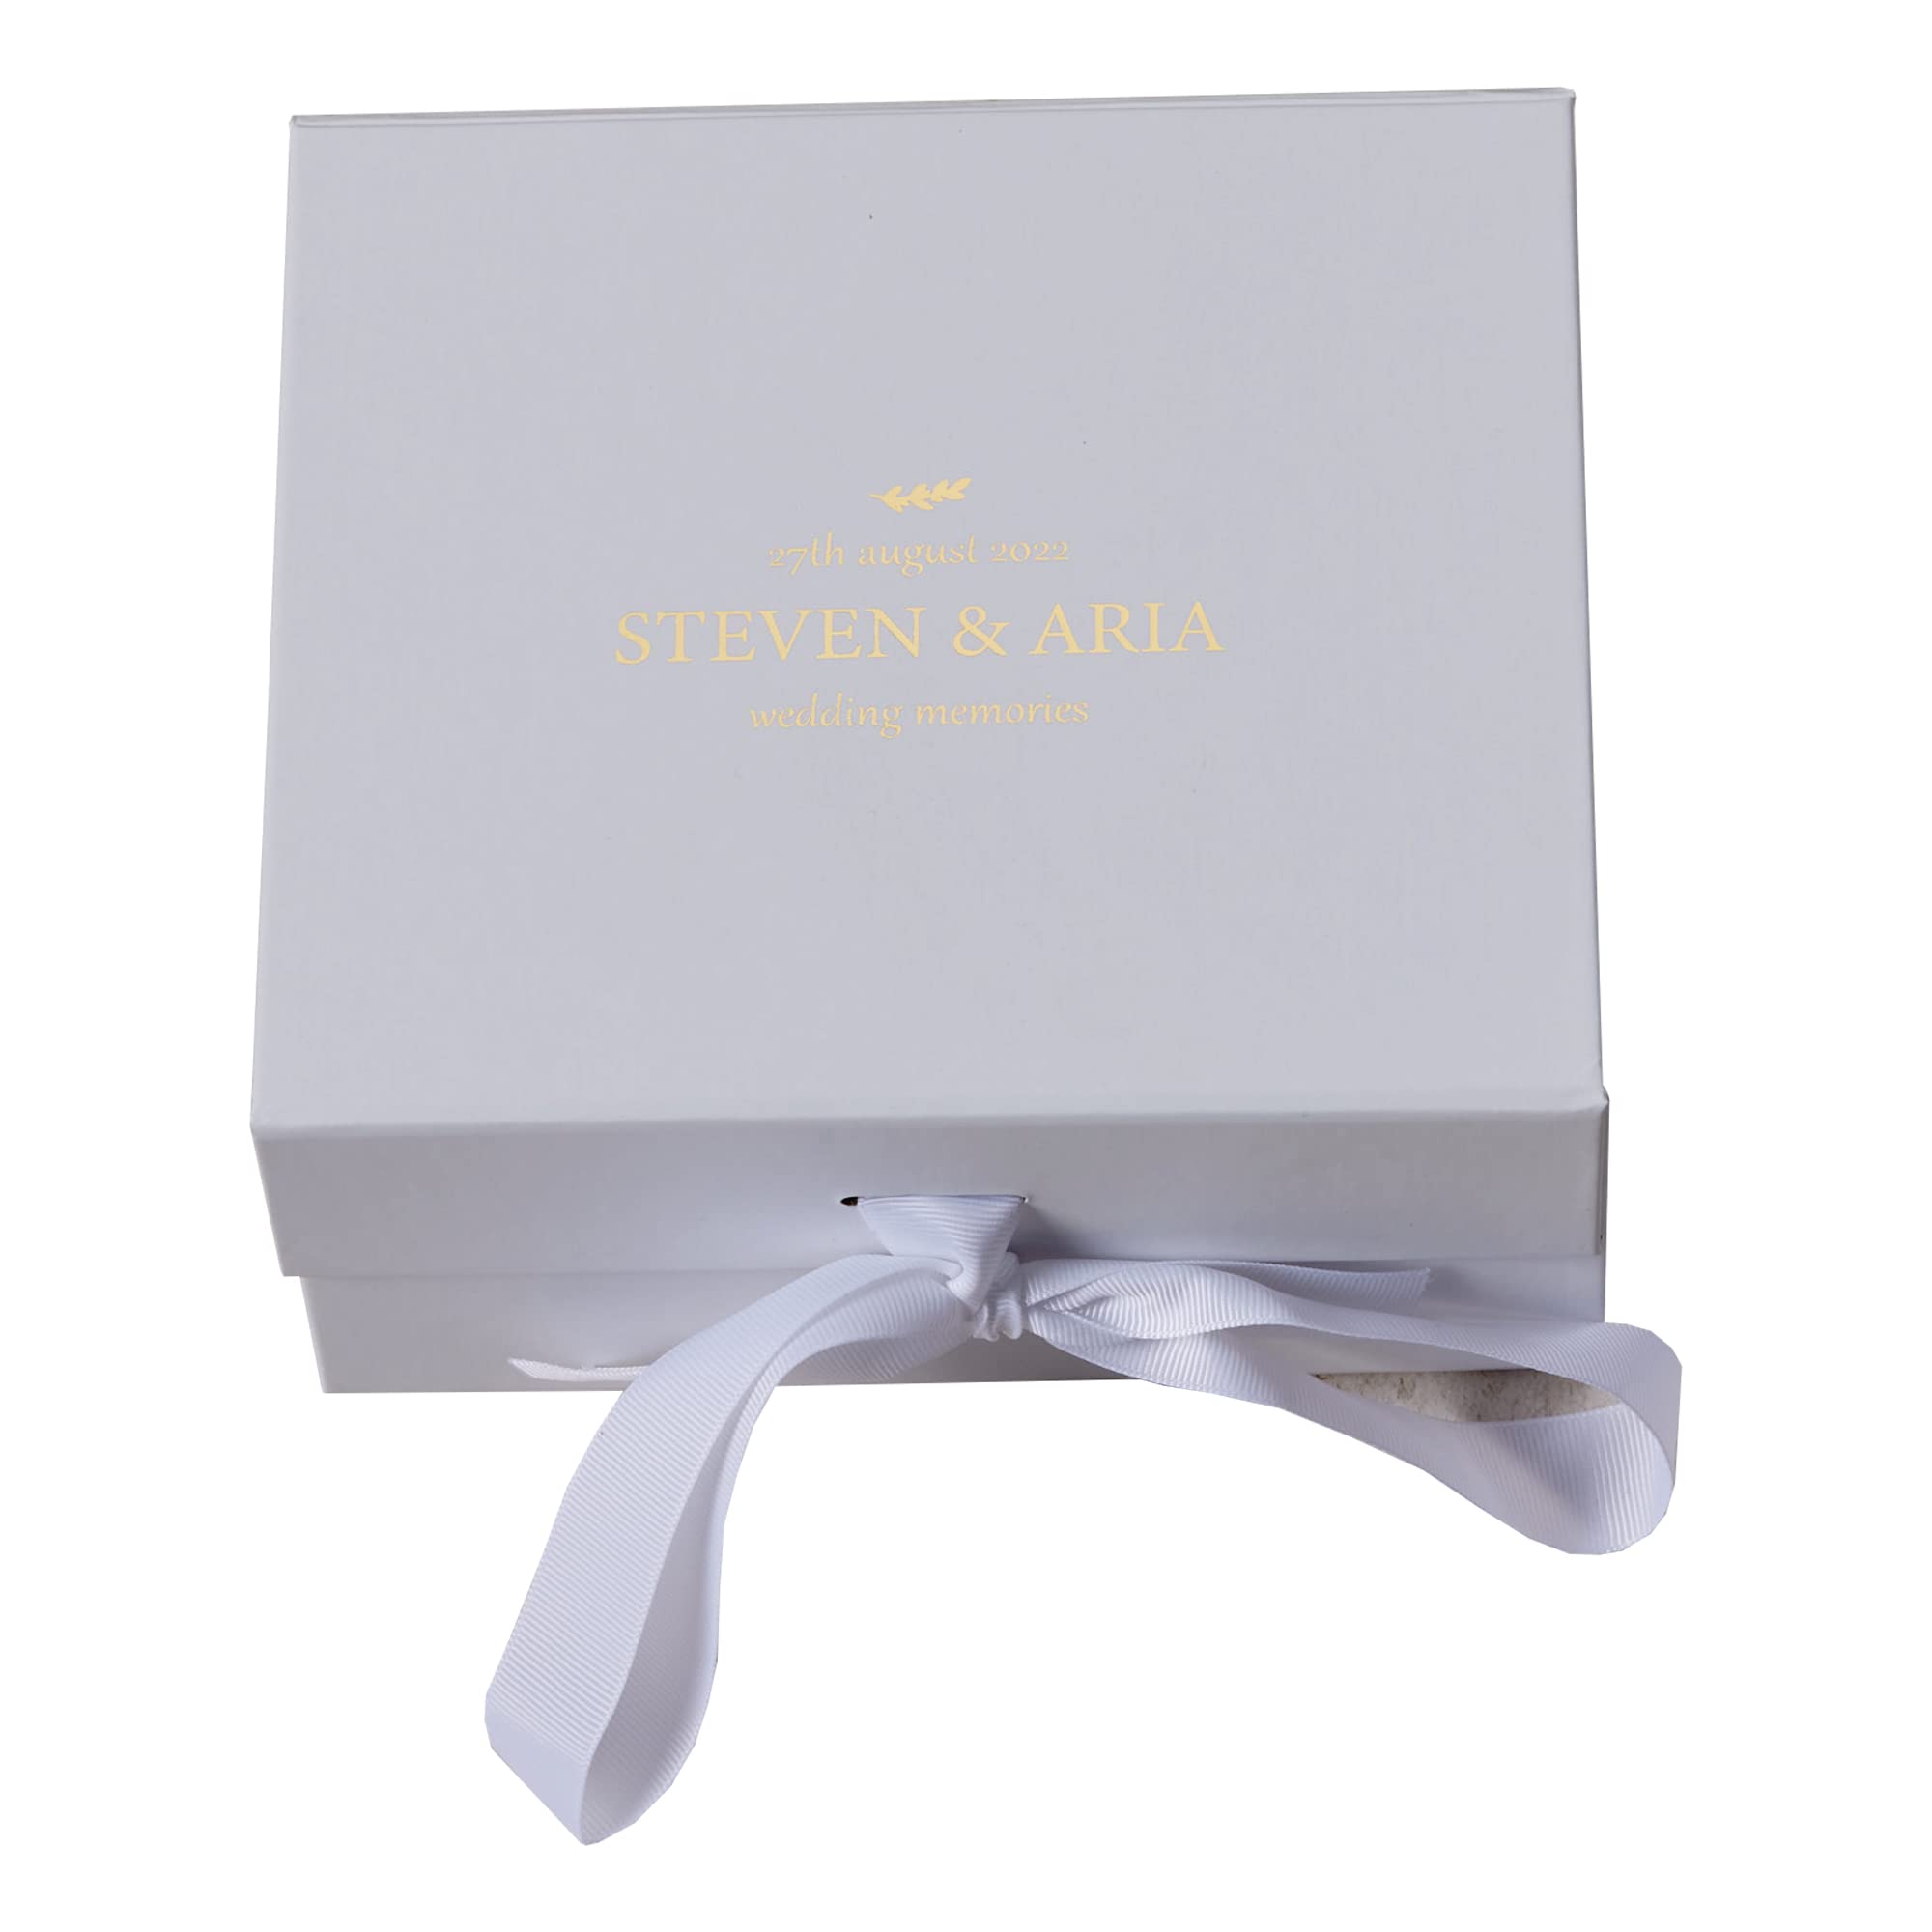 ukgiftstoreonline Personalised Wedding Memories White Gift Box With Gold Leaf